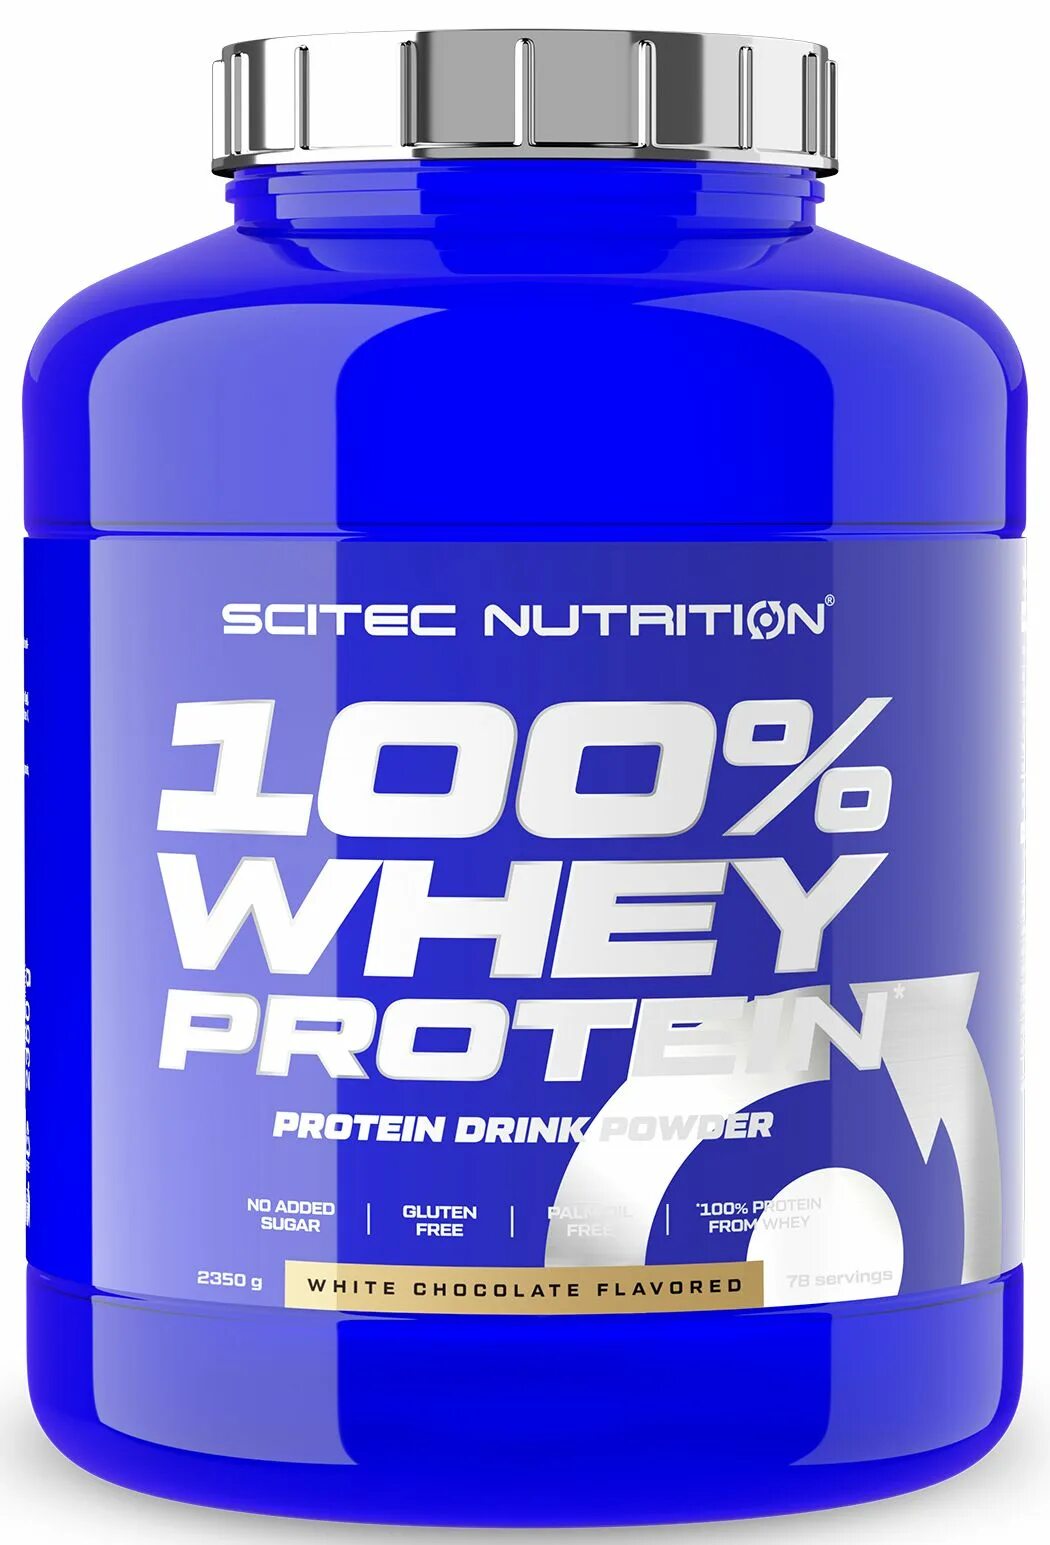 Scitec Nutrition Whey. Scitec Nutrition 100 Whey Protein. Scitec Nutrition Whey Protein. Scitec Nutrition 100 Whey Protein professional.